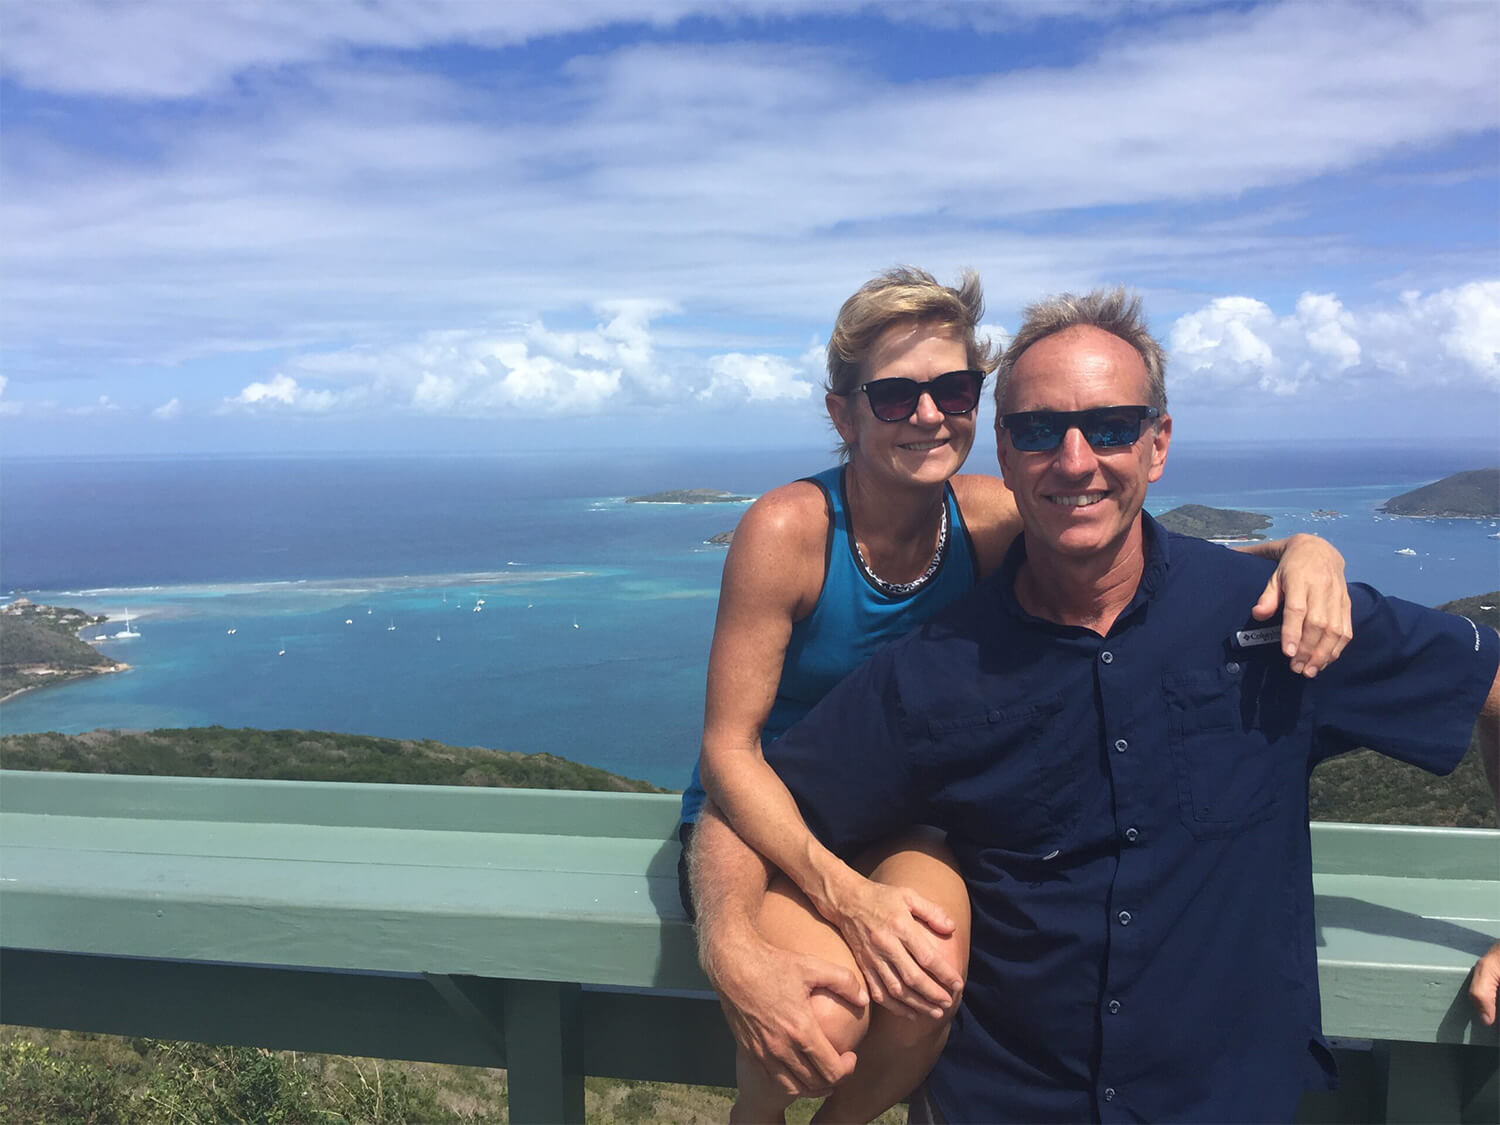 Collin and Corrine, owners of &Beyond Yacht Charters, standing in front of a view of a bay